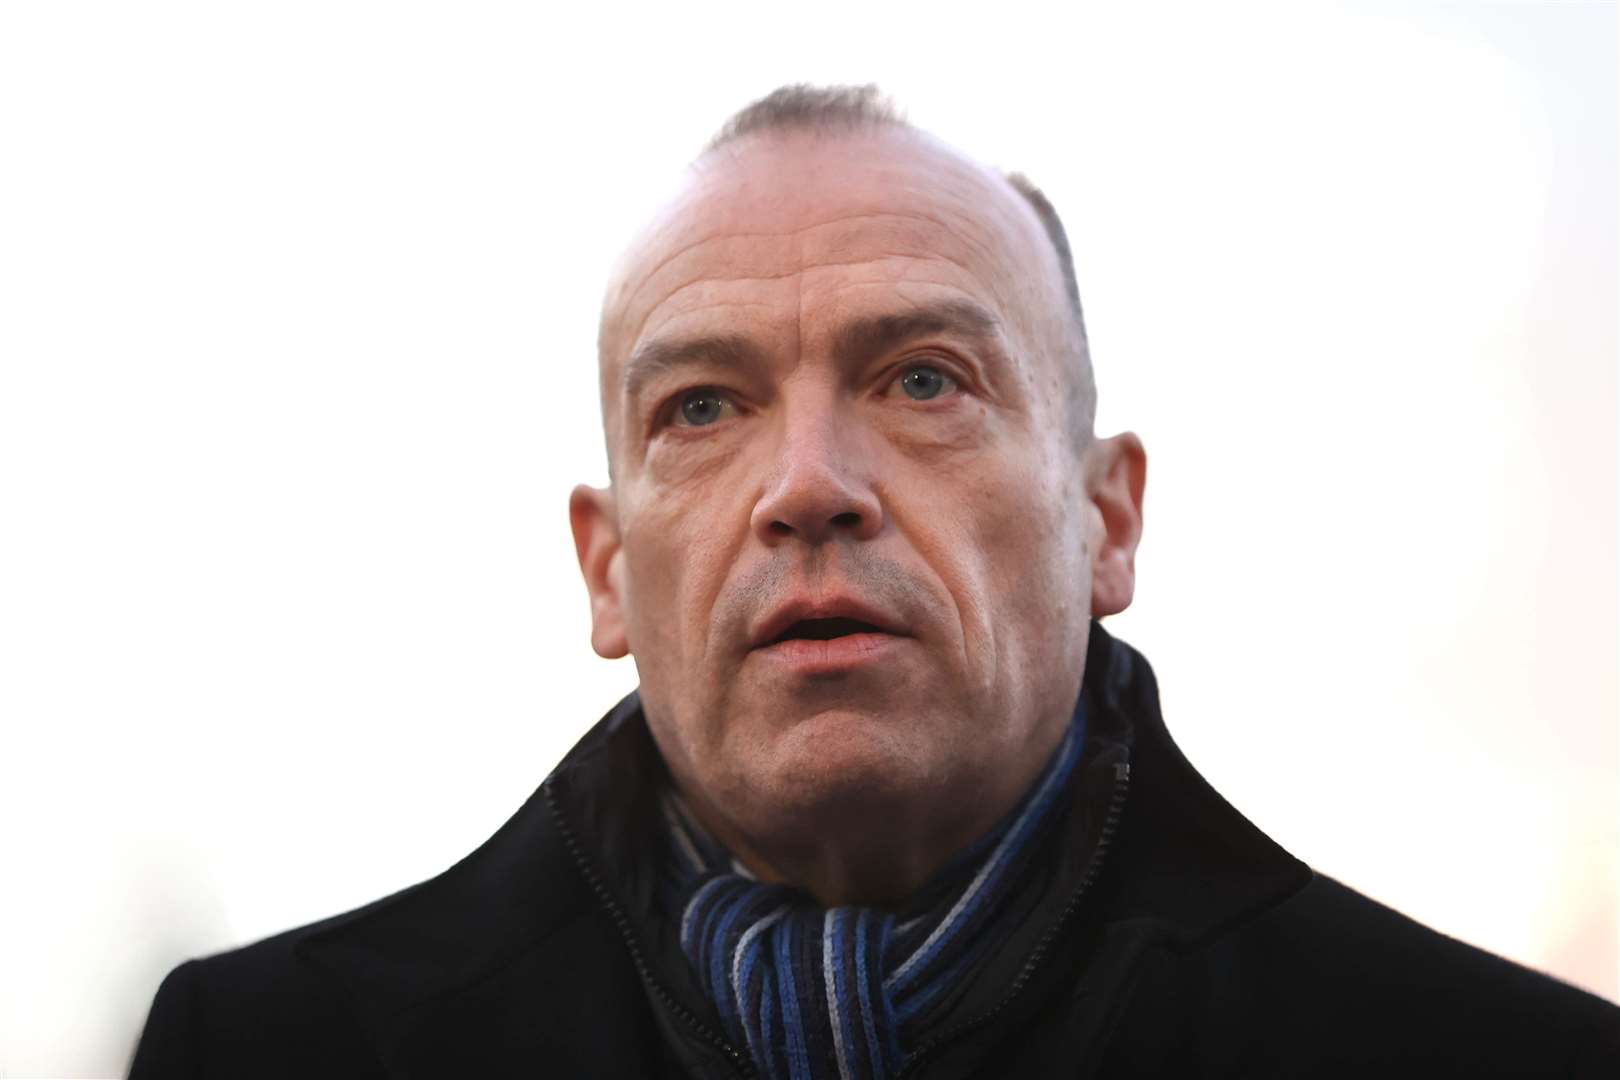 Northern Ireland Secretary Chris Heaton-Harris has offered money to settle public sector workers’ claims, but it is dependent on the return of Stormont (Liam McBurney/PA)